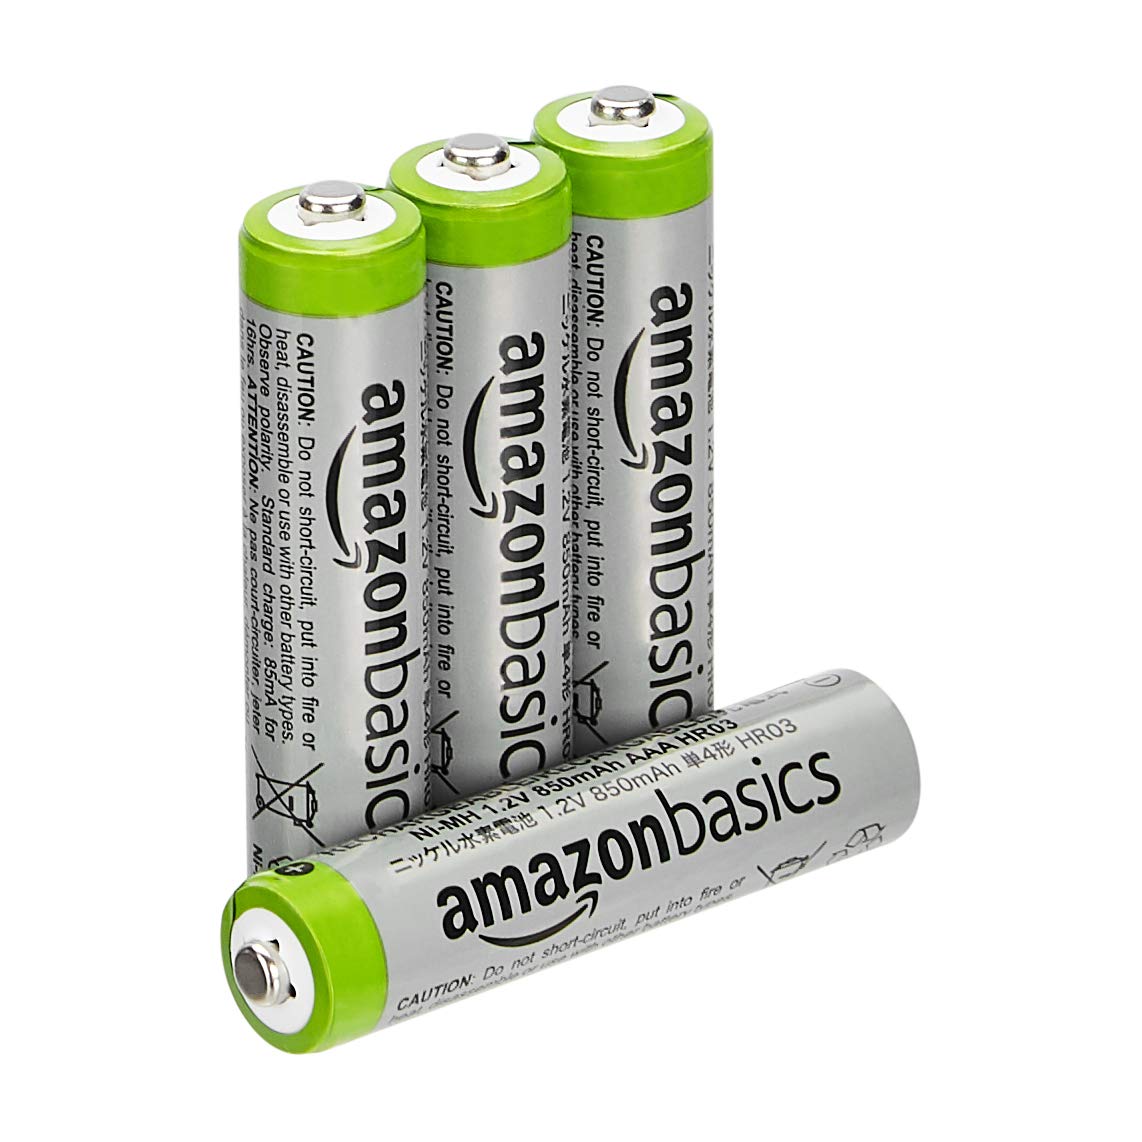 Amazon Basics 4-Pack Rechargeable AAA NiMH High-Capacity Batteries, 850 mAh, Pre-Charged